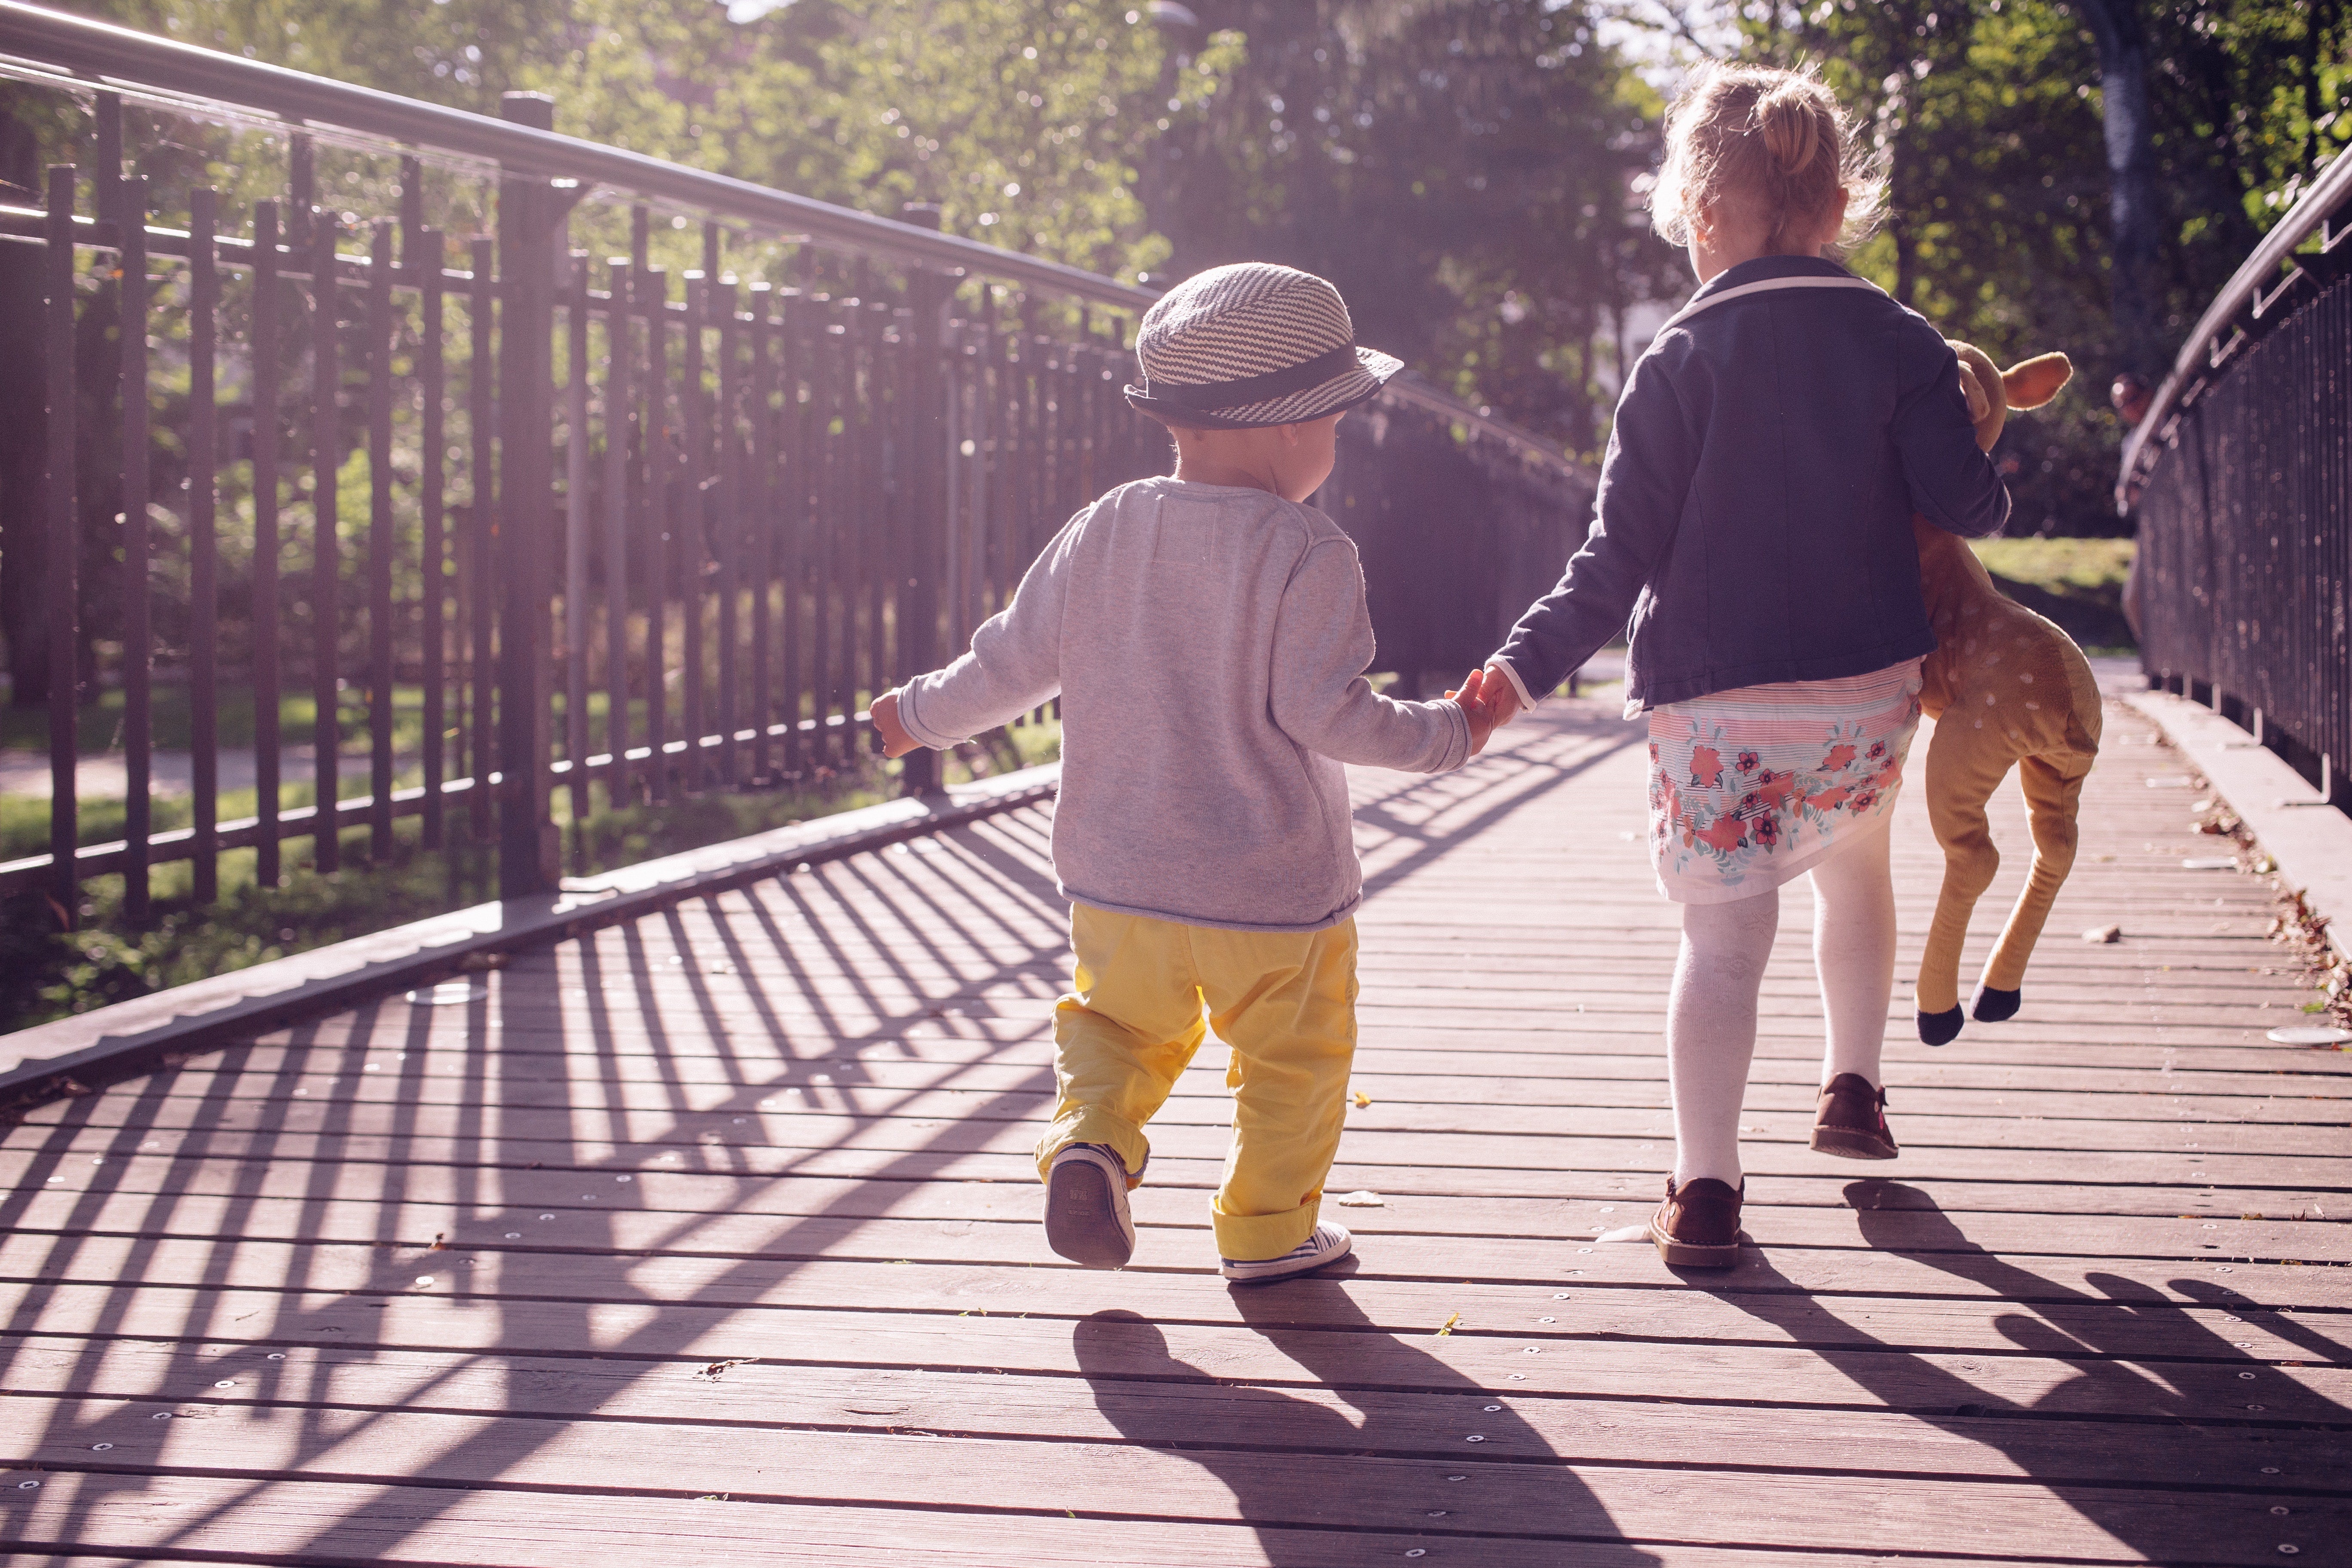 Best outdoor safety tips, especially for the kids.(Photo by freestocks.org from Pexels)